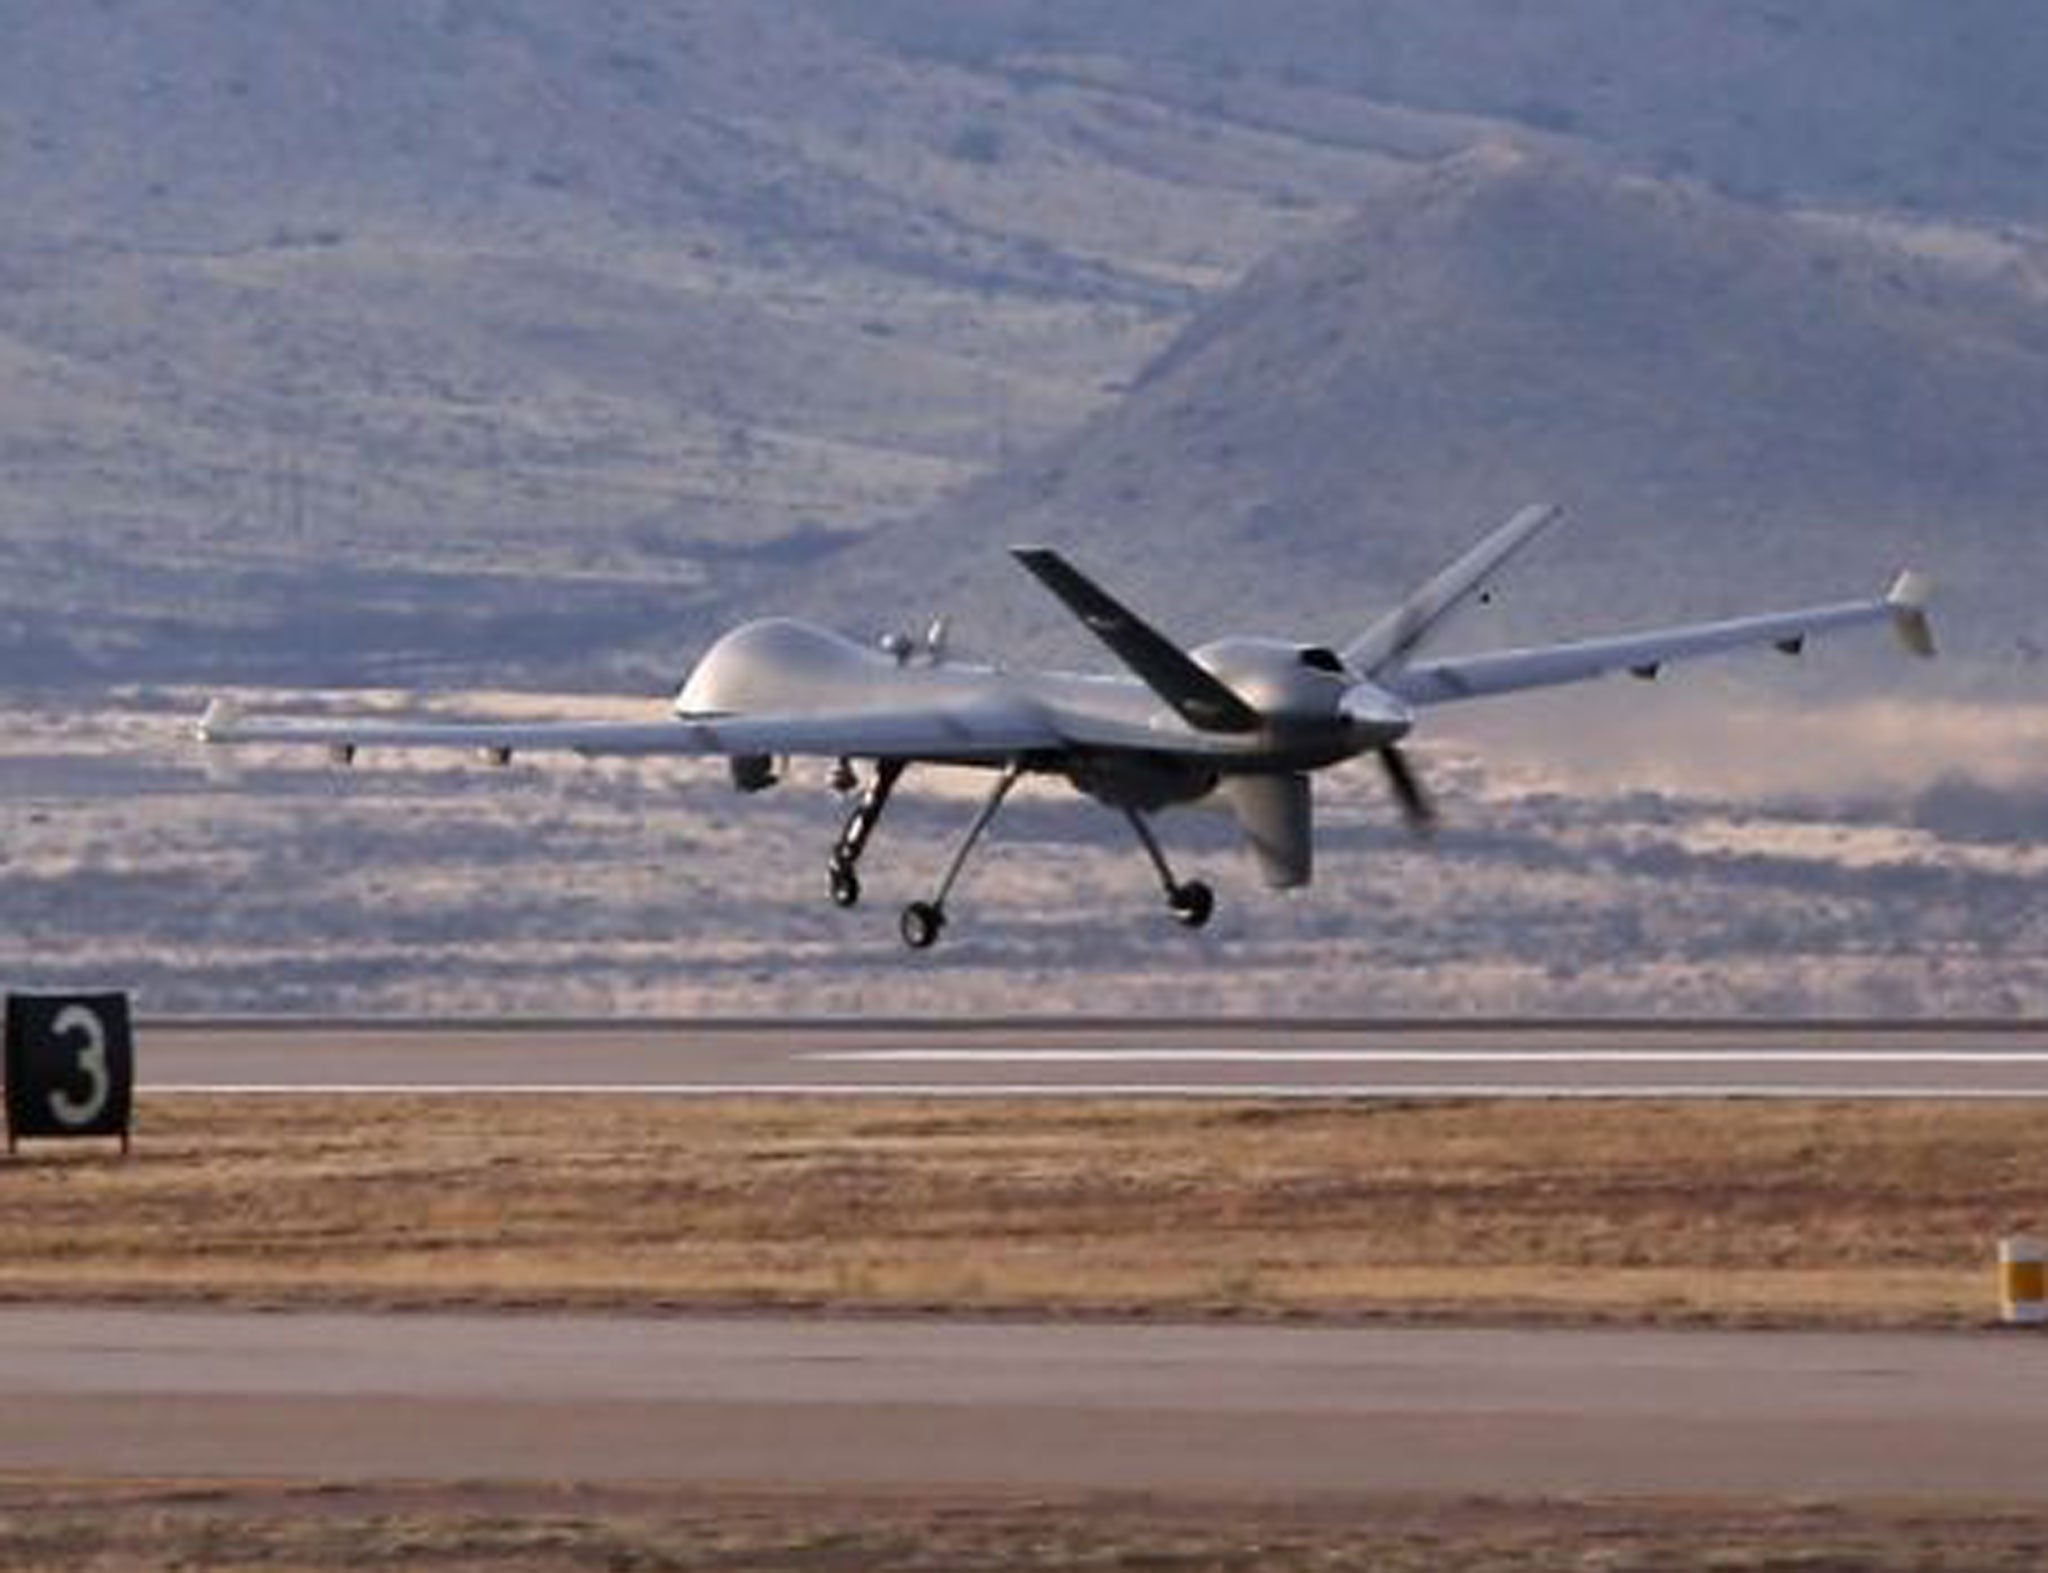 There have been over 50 confirmed US drone strikes in Yemen since 2002